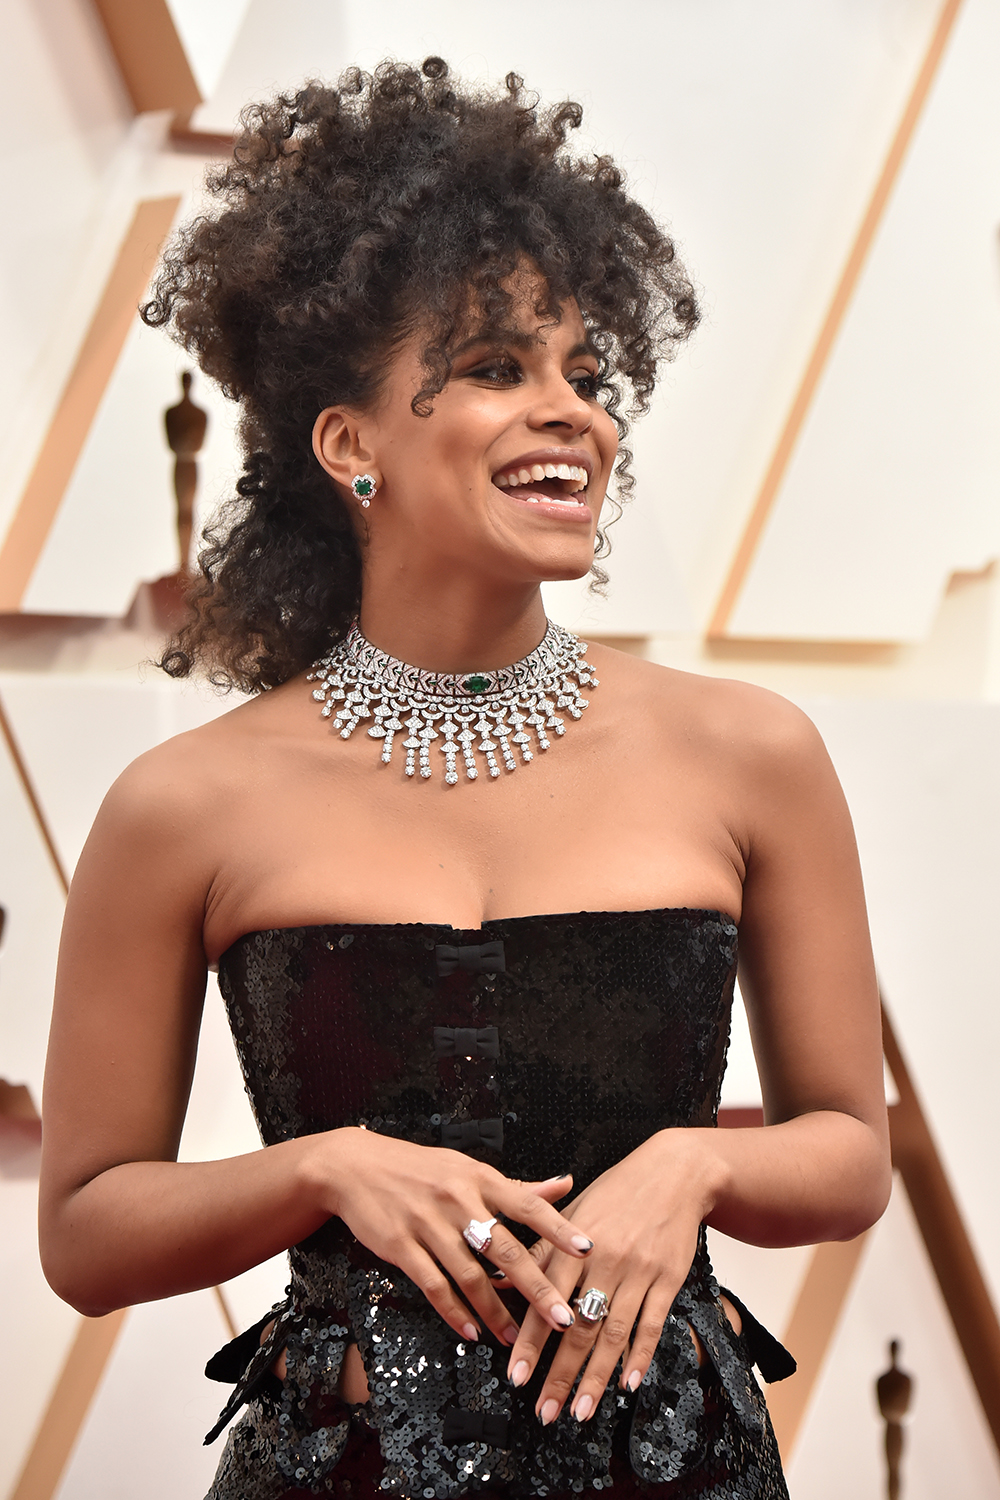 HOLLYWOOD, CALIFORNIA - FEBRUARY 09: Zazie Beetz attends the 92nd Annual Academy Awards at Hollywood and Highland on February 09, 2020 in Hollywood, California. (Photo by Jeff Kravitz/FilmMagic)